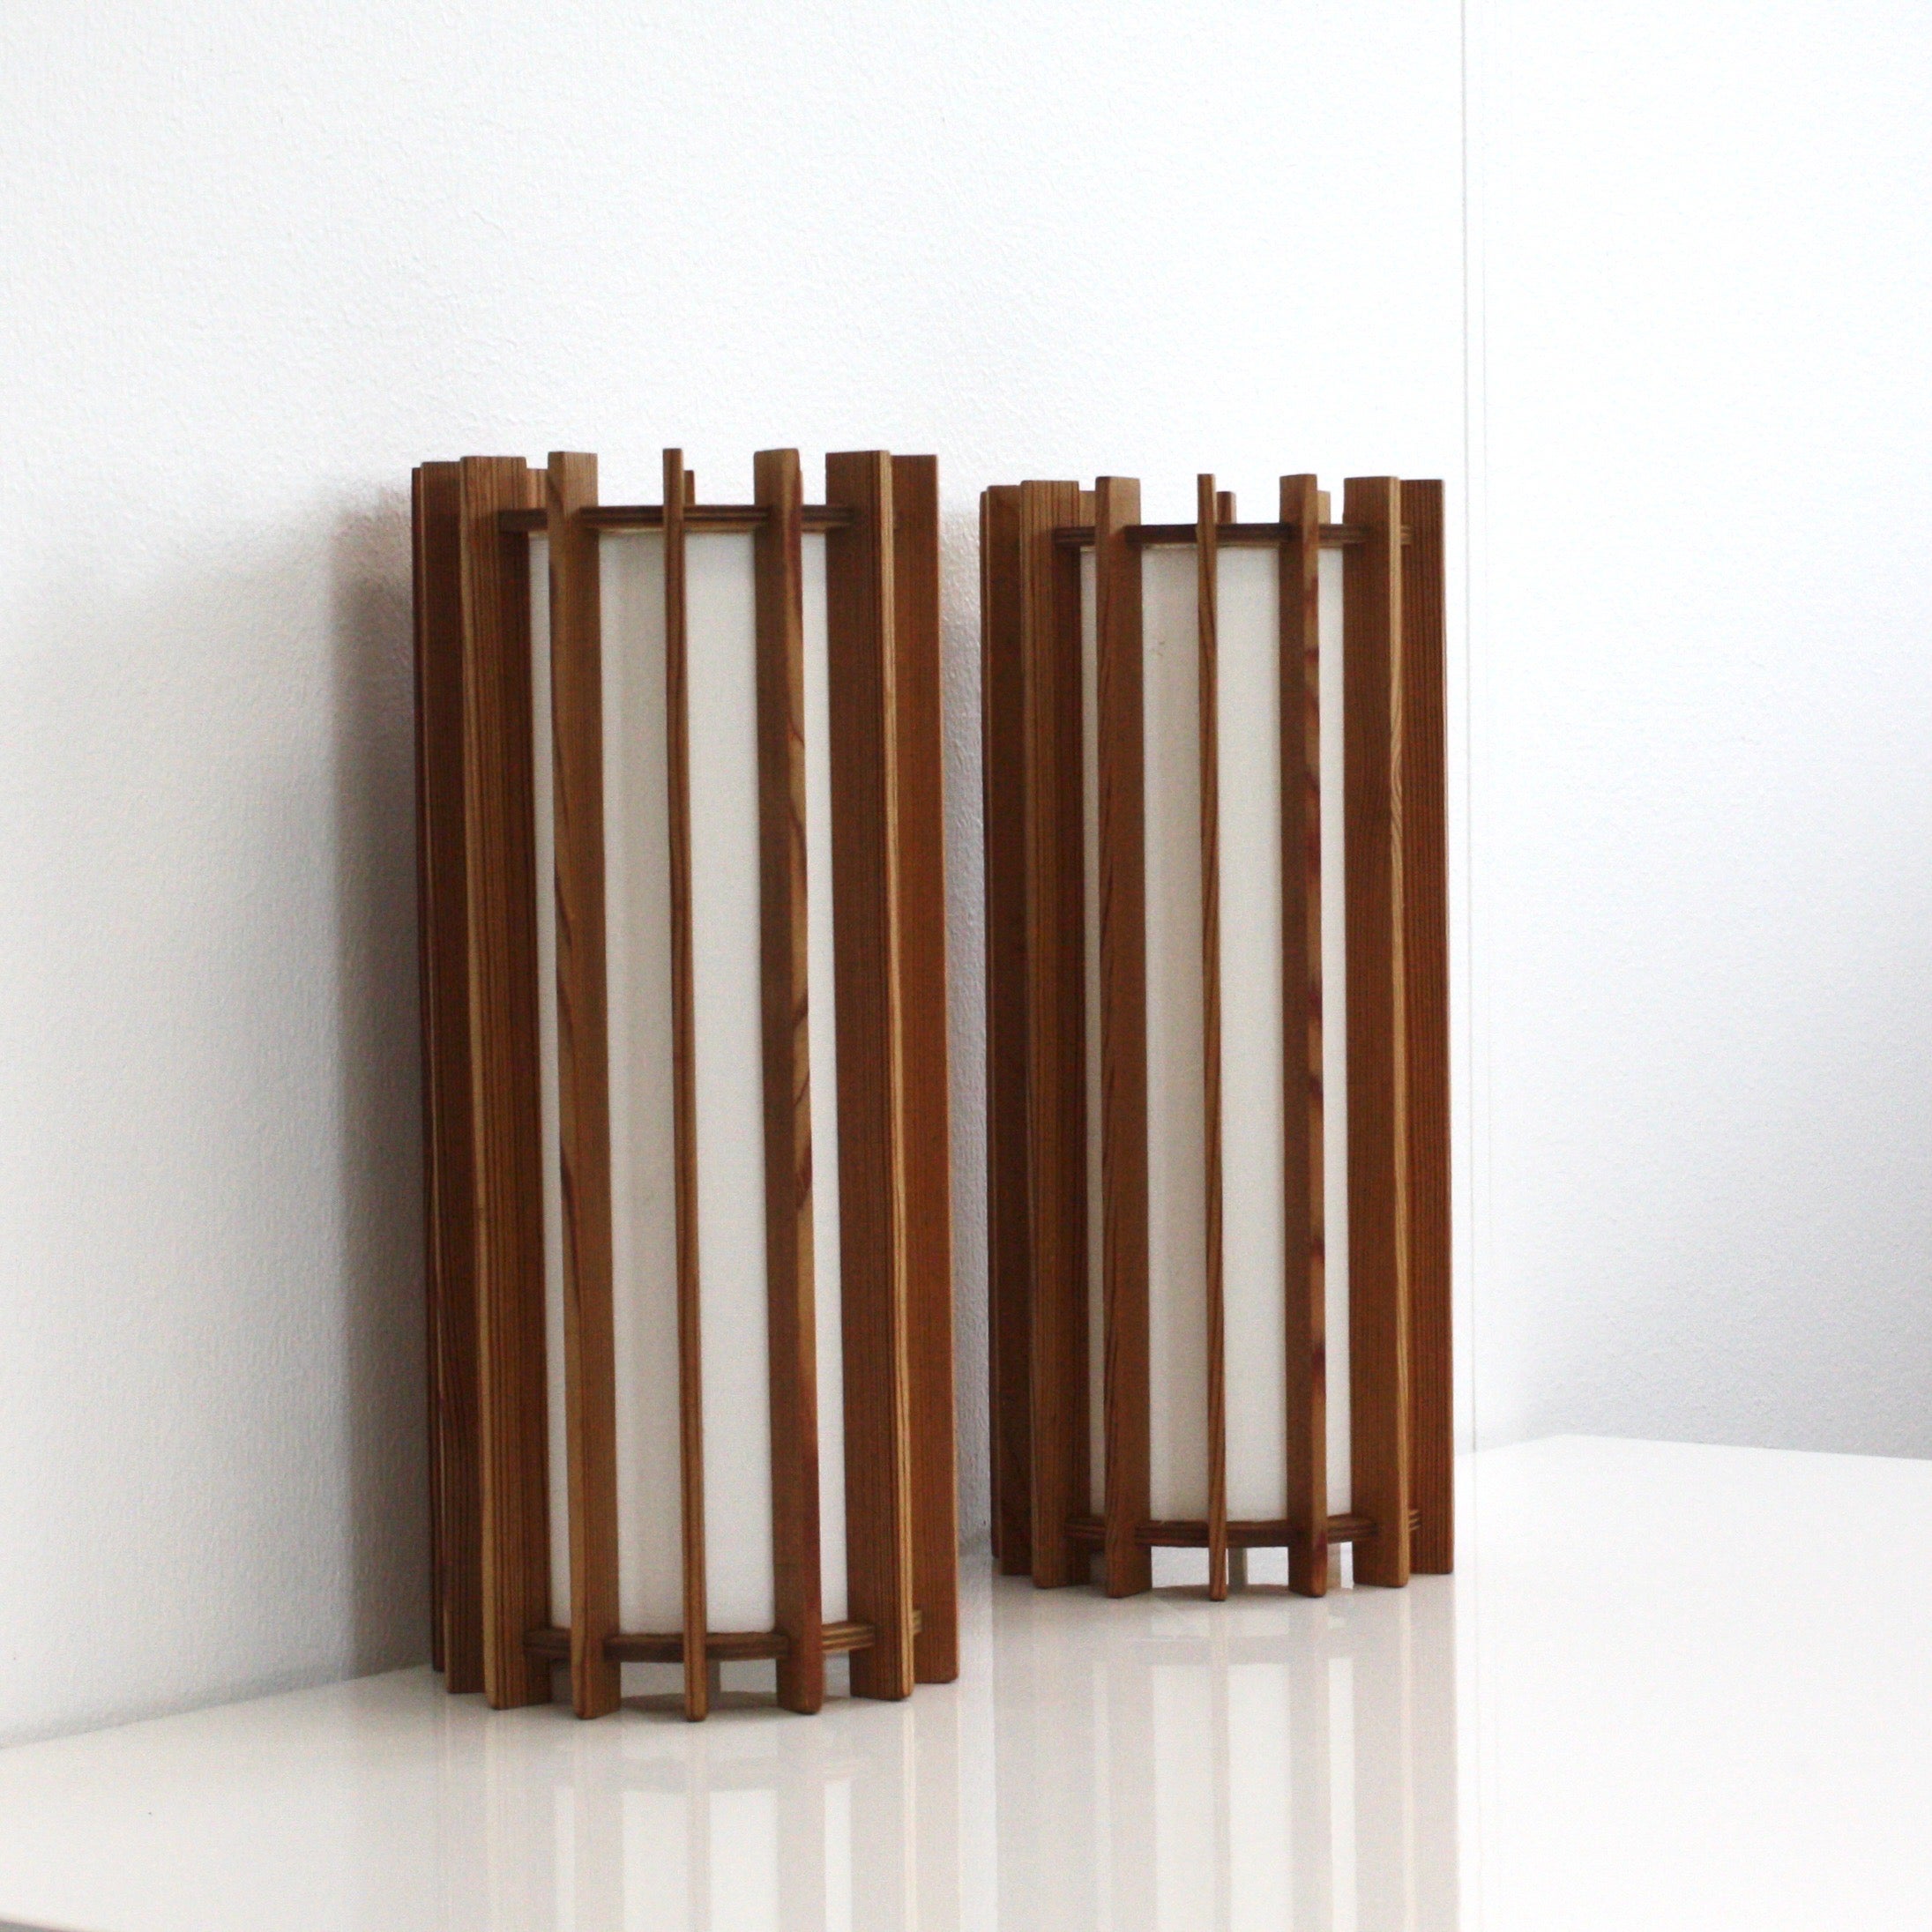 A set of Scandinavian Modern pine wood wall lamps designed by Ib Fabiansen in the 1960s for for Fog & Morup. The set is in excellent vintage condition.

* A pair (2) of wall lamps made of vertical sticks in pine wood and with inner tubes in light